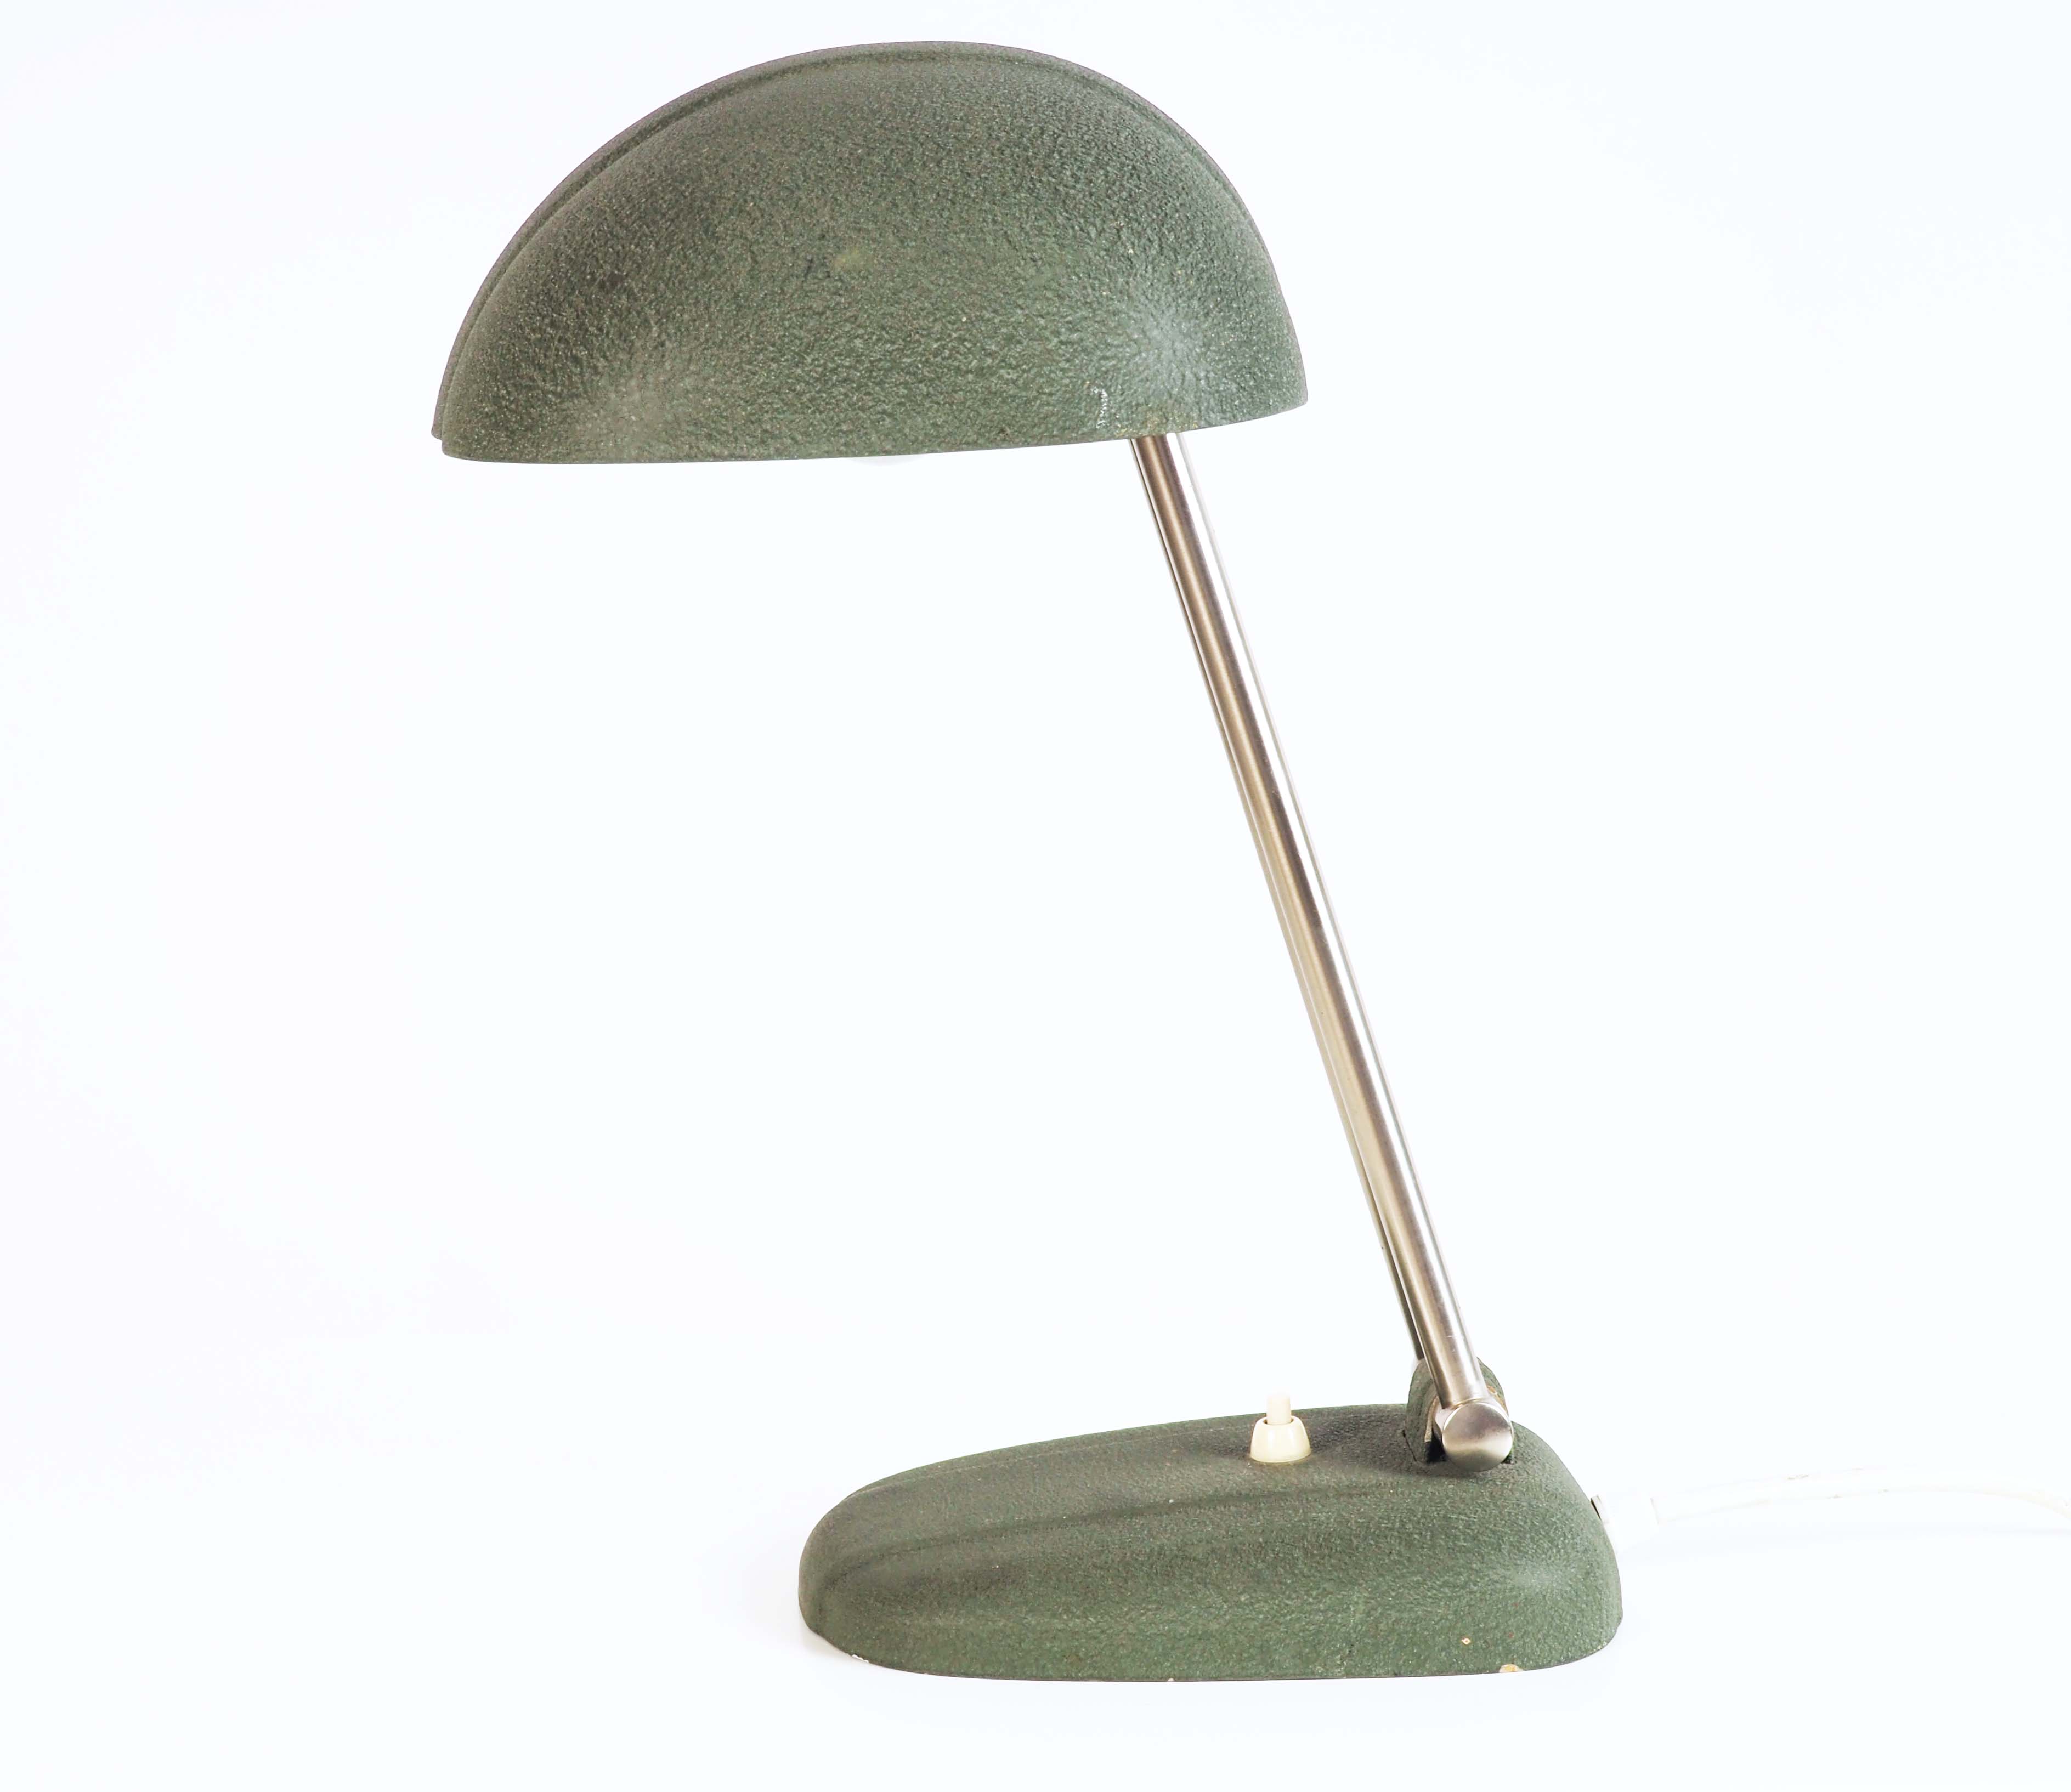 Table lamp by Siegfried Giedion